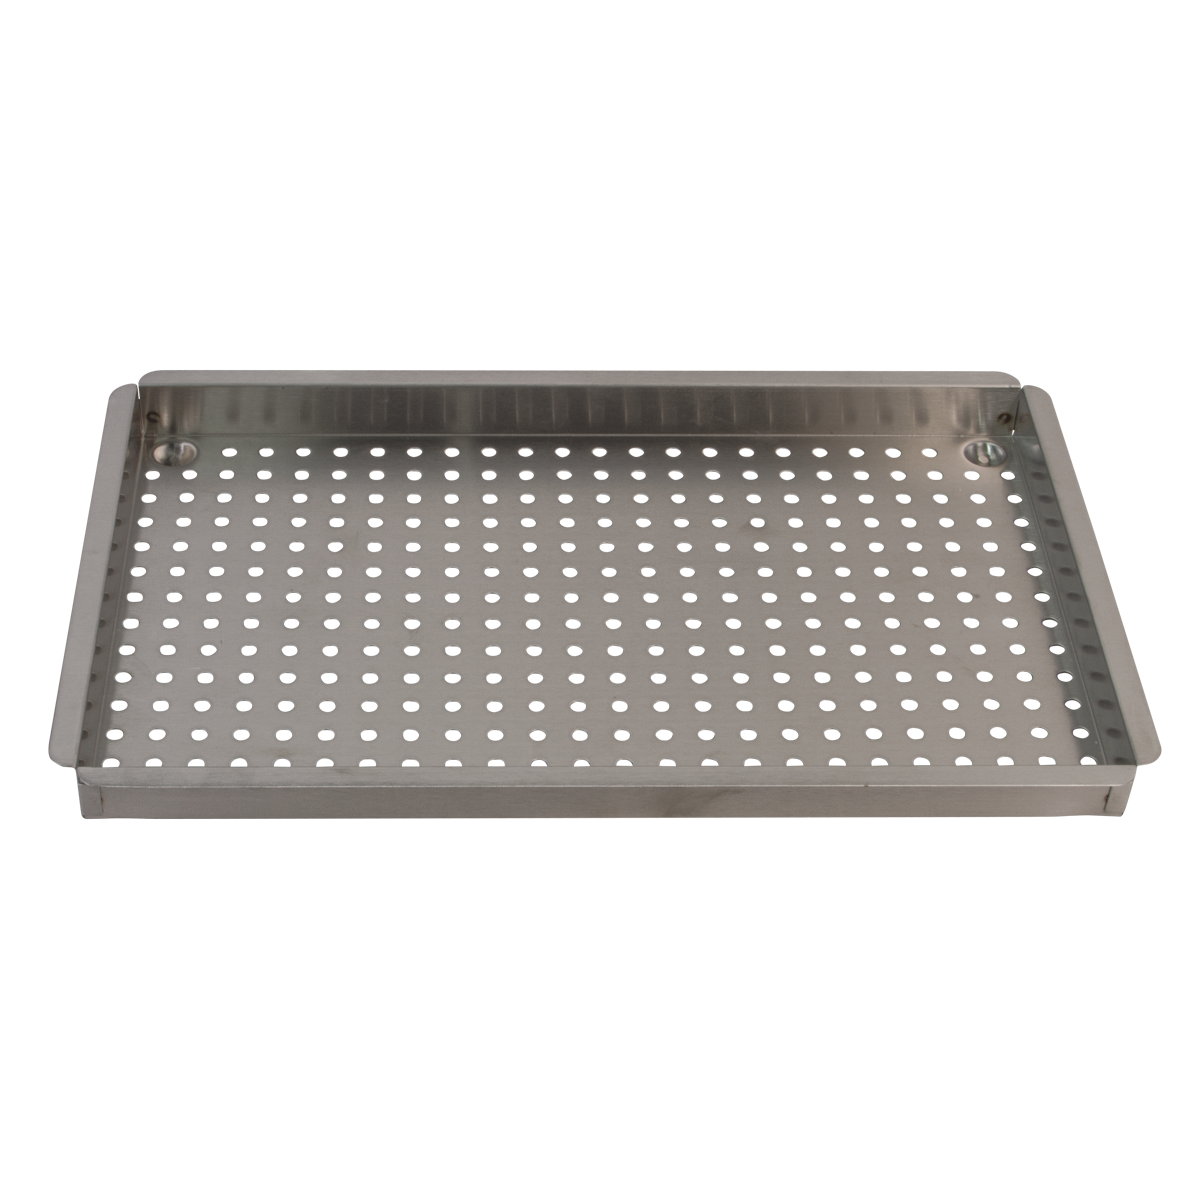 Ultraclave Large Tray (Midmark M11)